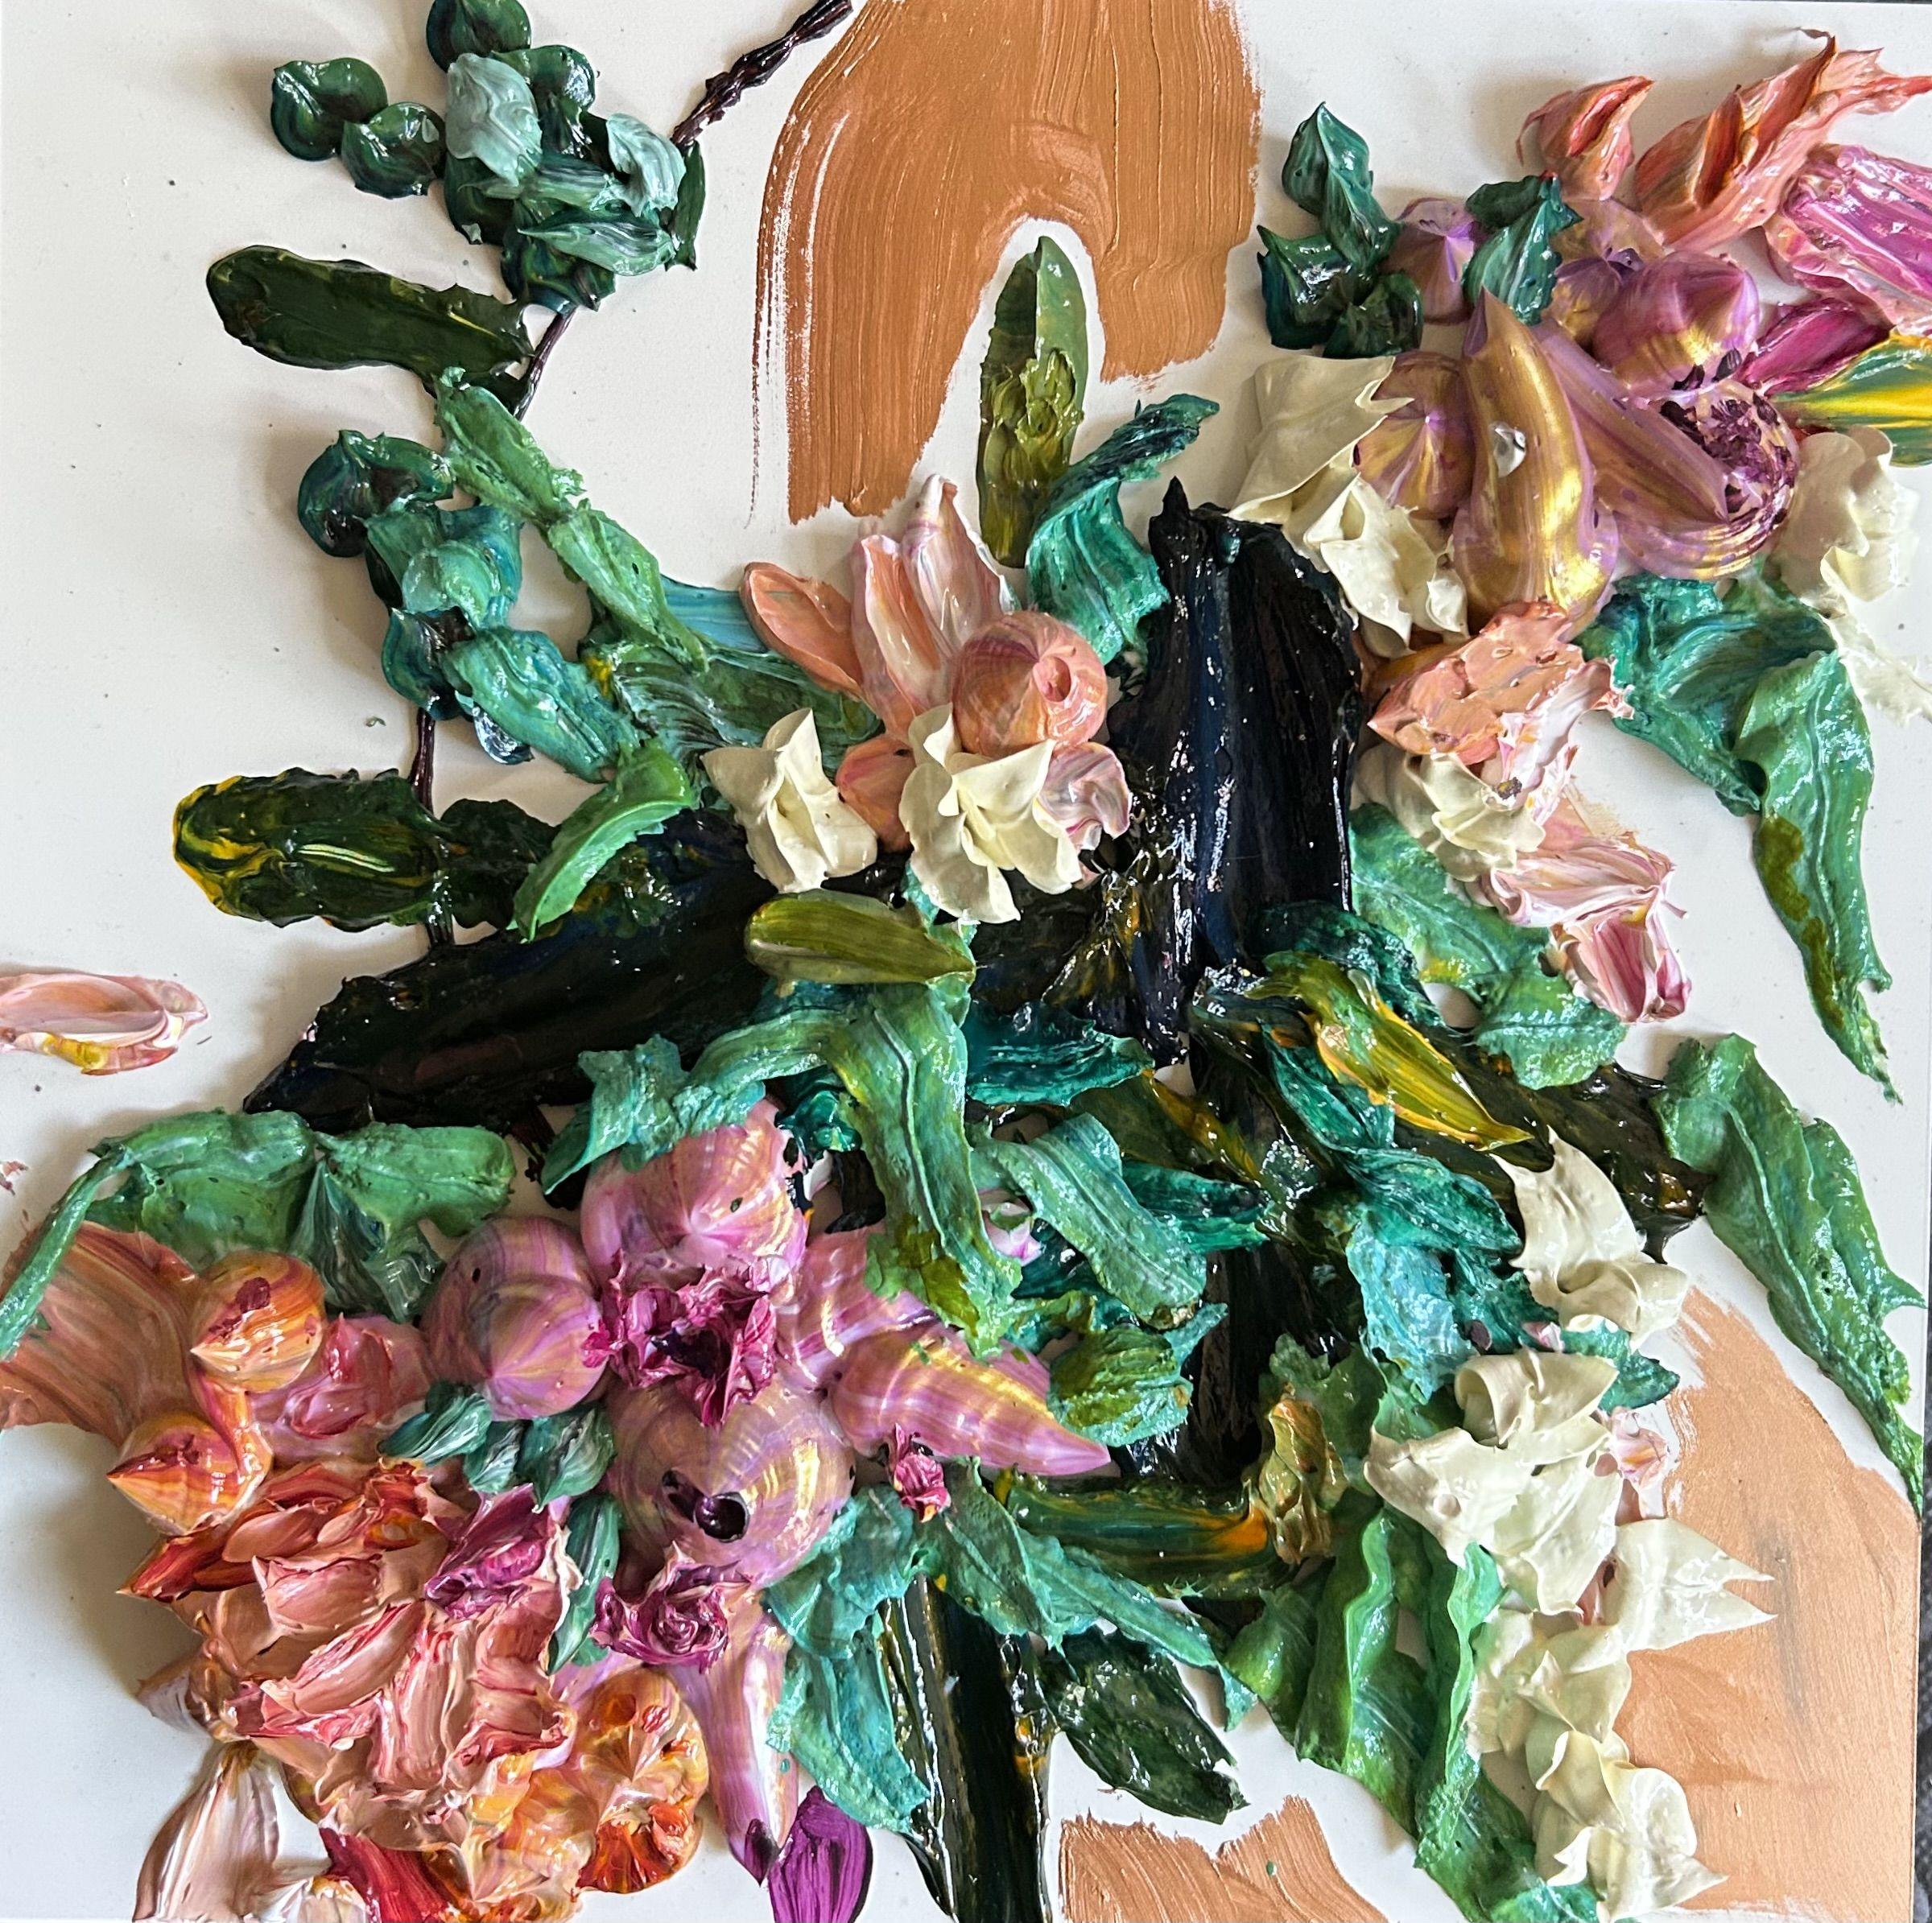 Julia Hacker's latest direction in art is experimenting with different material qualities of paint. Recently the artist started using very thick applications of acrylic paint. She sculpts with heavy, delicious gell-like paint, creating 3d flowers